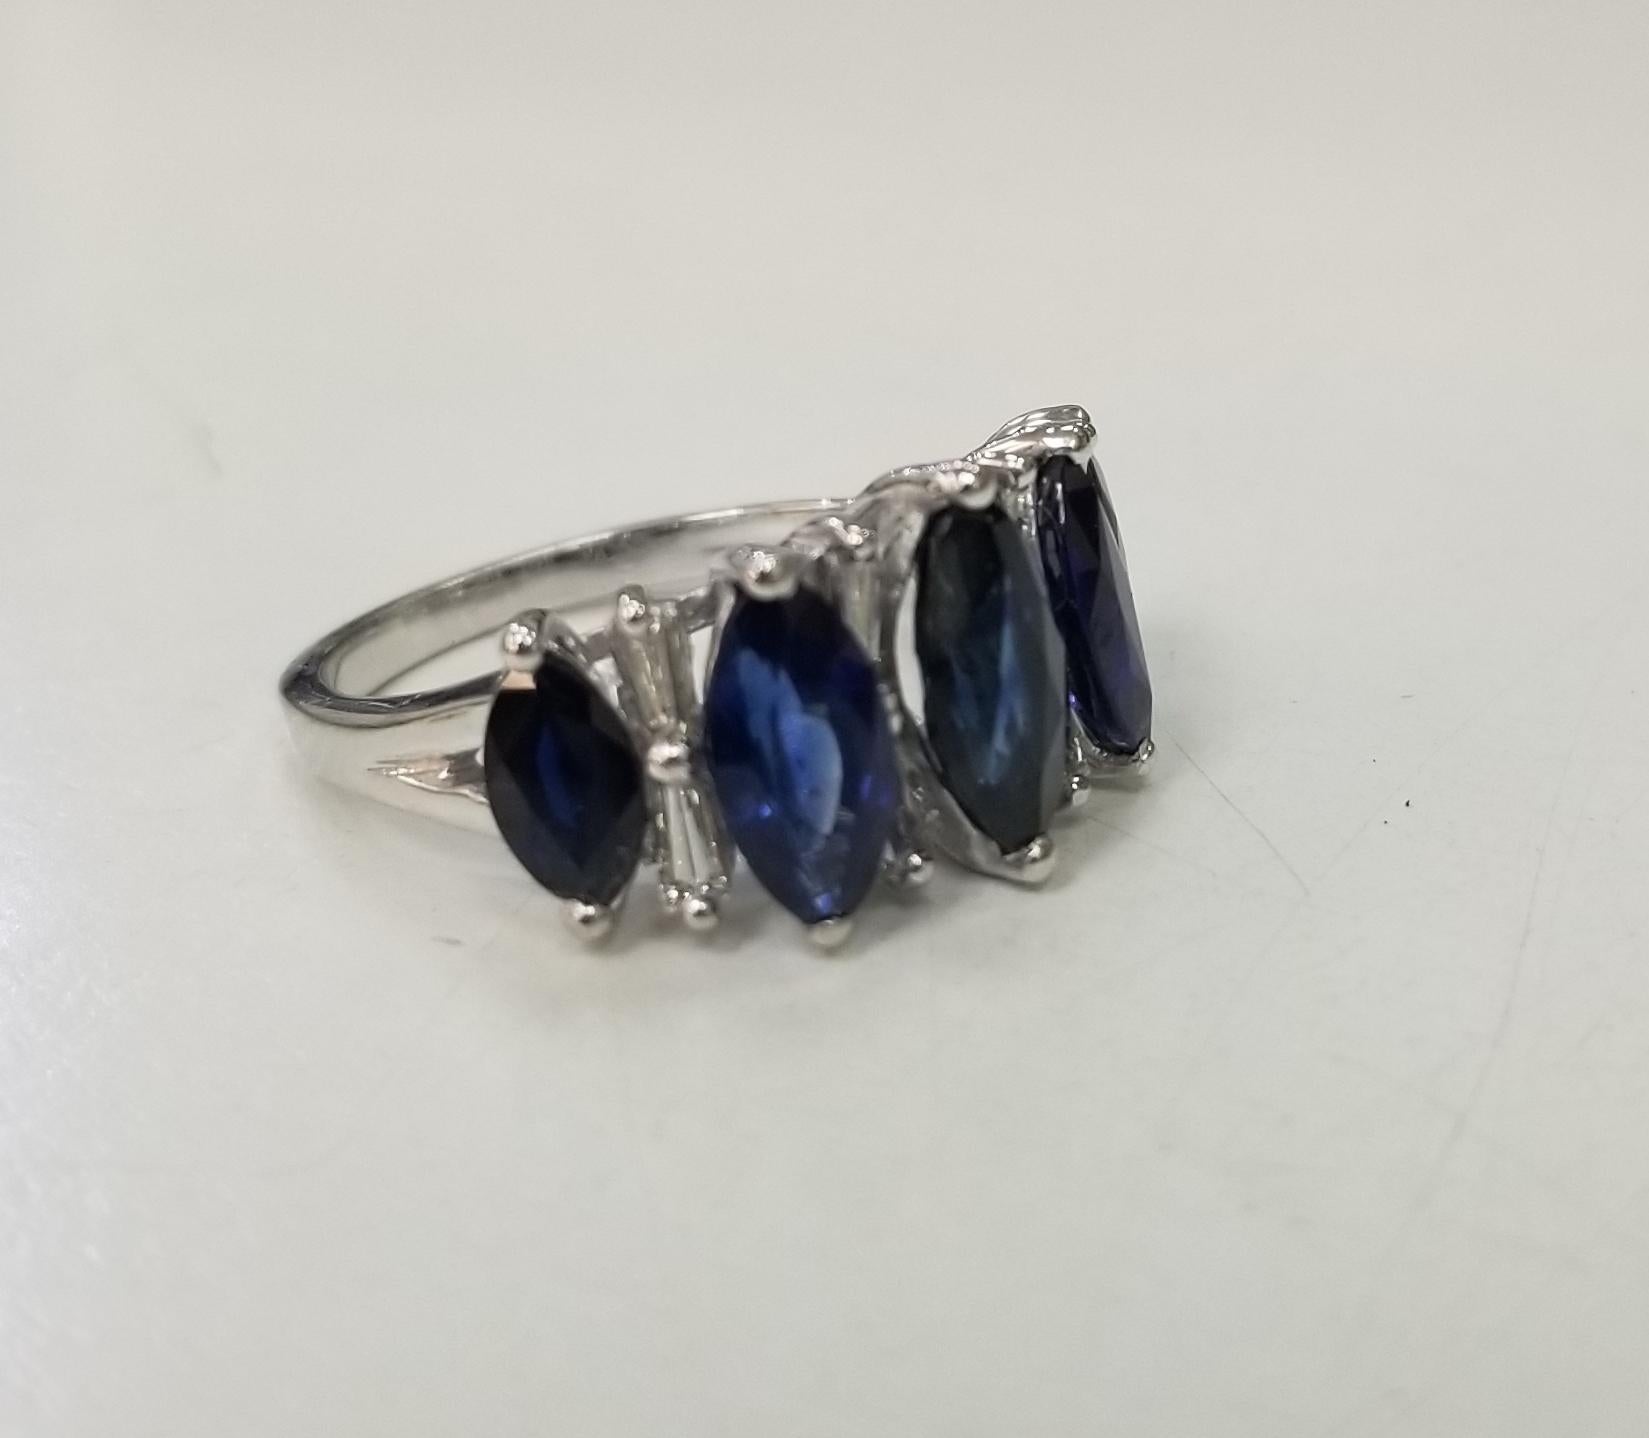 Beautiful platinum sapphire and diamond ring.
Specifications:
    main stone: 5 Marquise Sapphires 3.47 cts. 
    diamond; 8 diamonds weighing approx. .40 cts.
    diamond; clarity: VS
    diamond; color: G
    metal:Platinum
    type:ring 
   